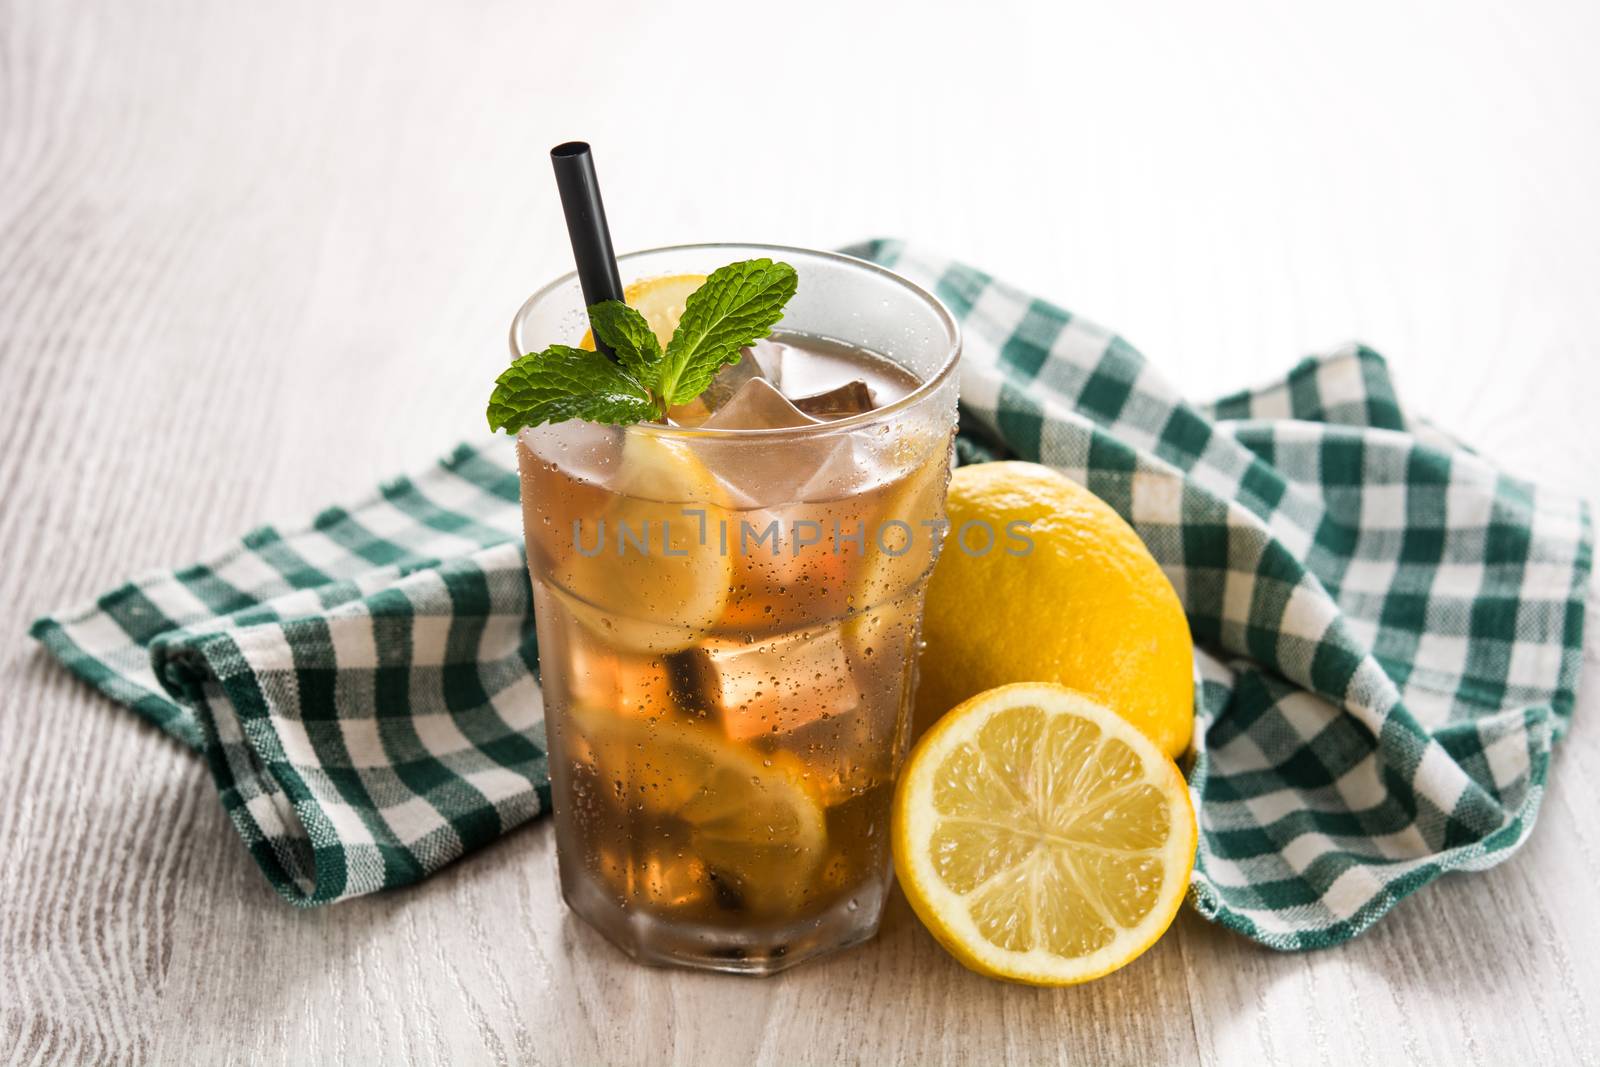 Iced tea drink with lemon in glass by chandlervid85